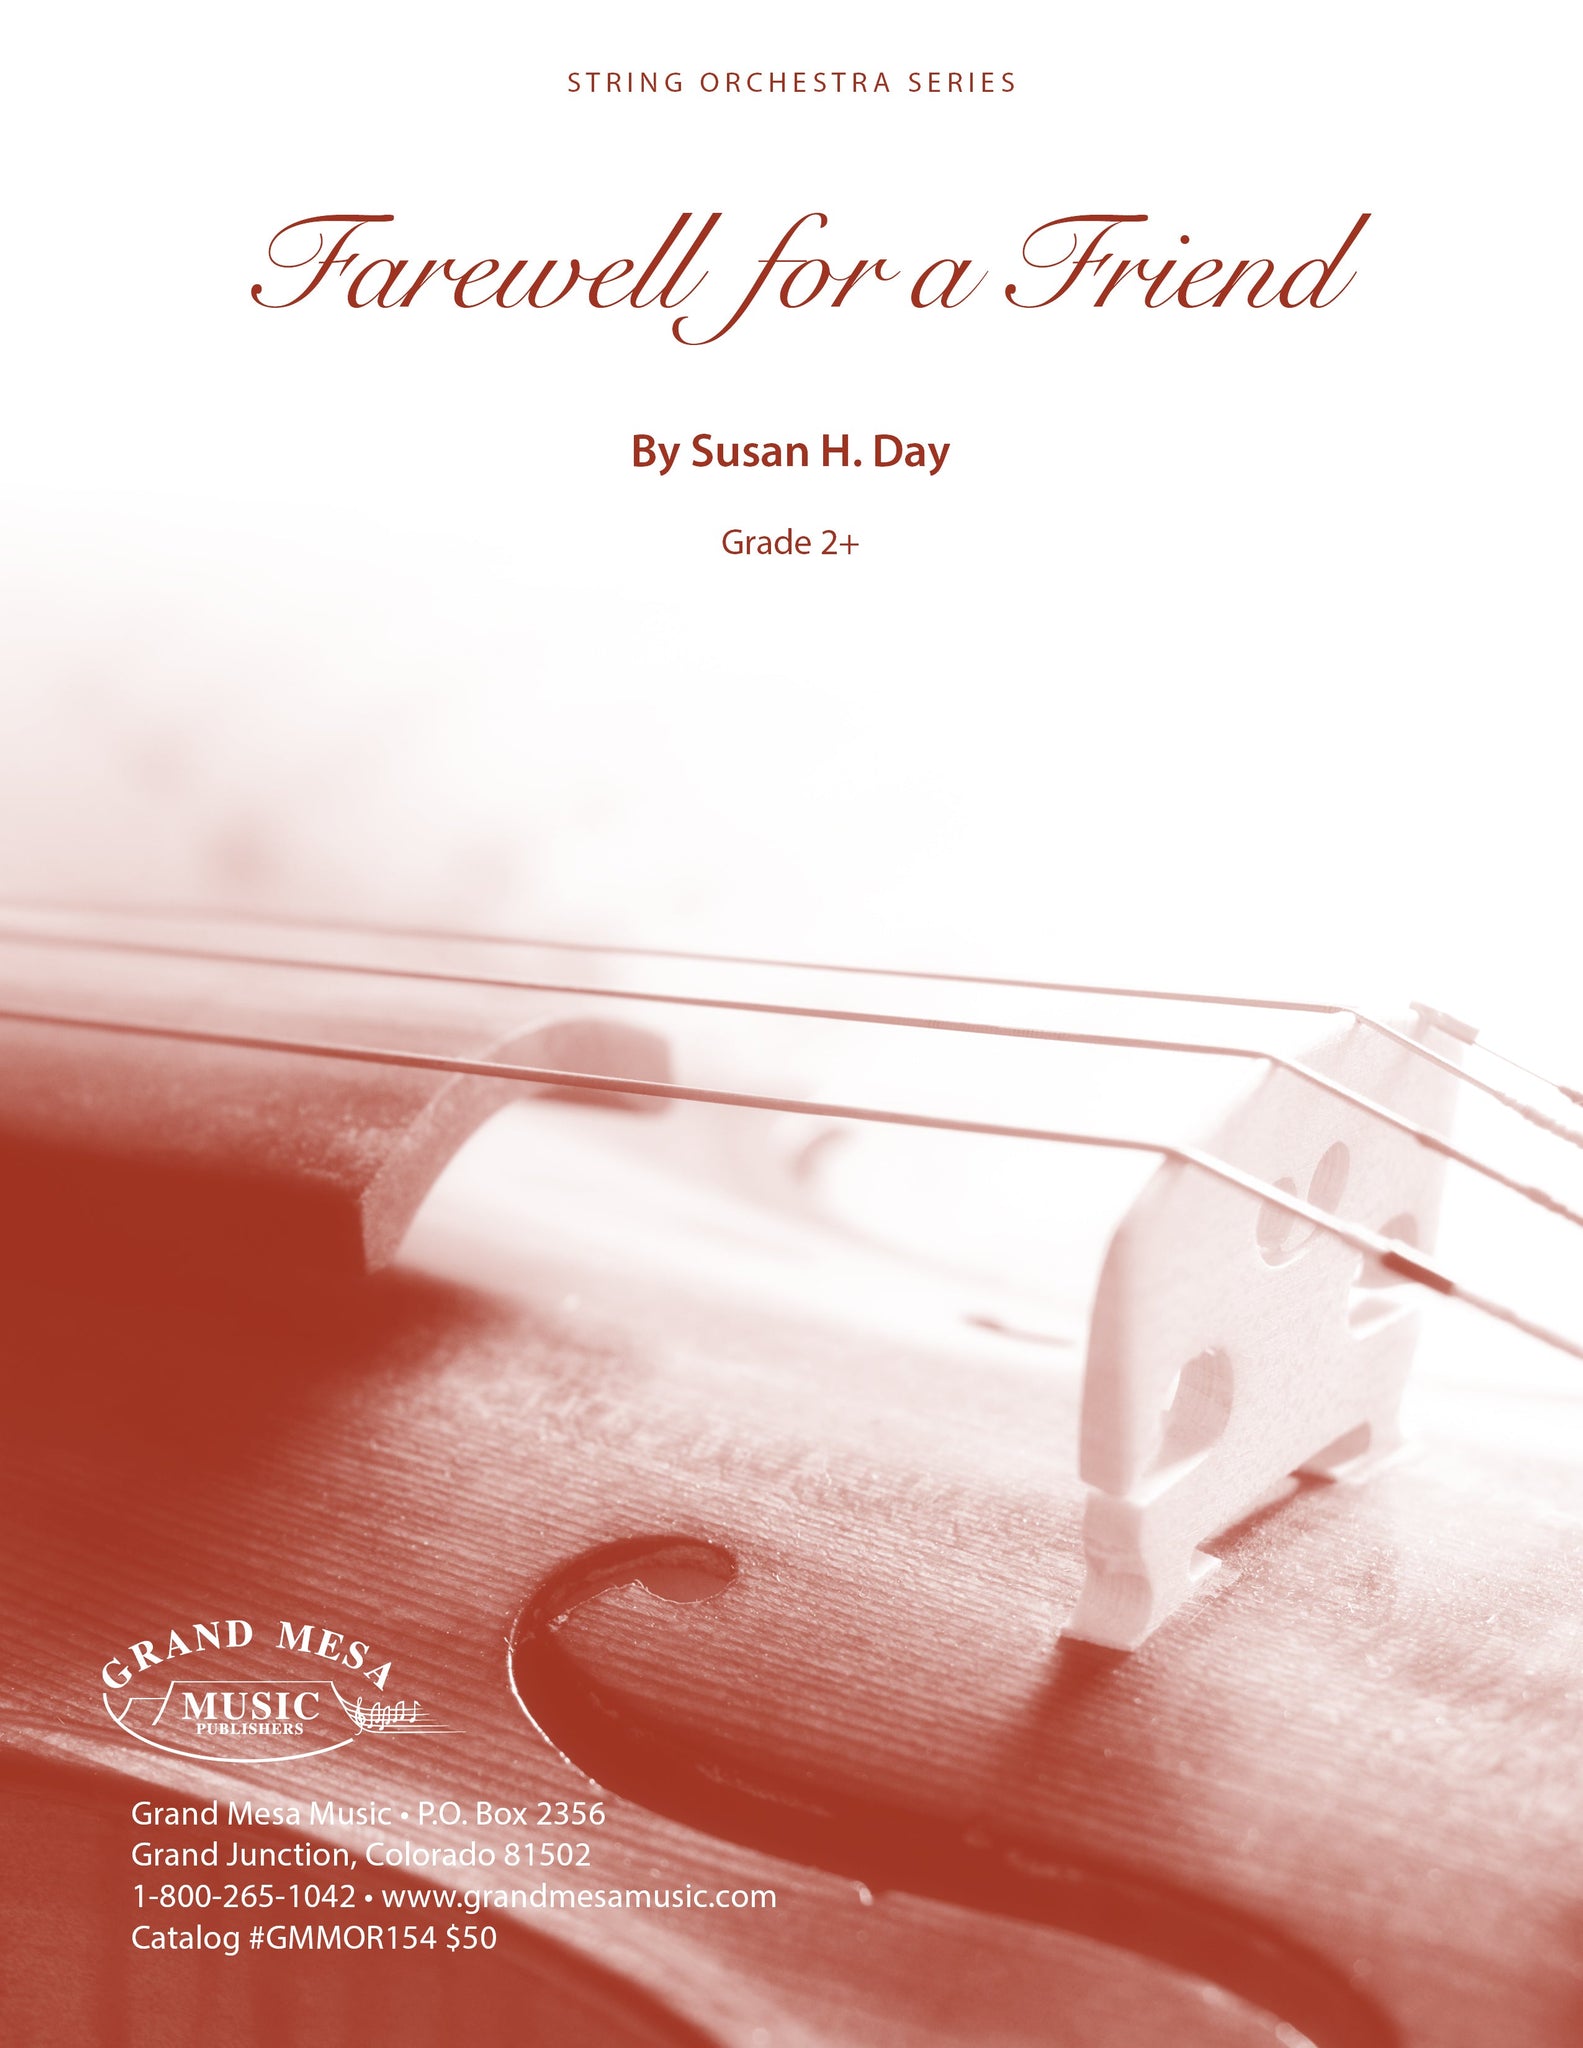 Strings sheet music cover of Farewell for a Friend, composed by Susan Day.